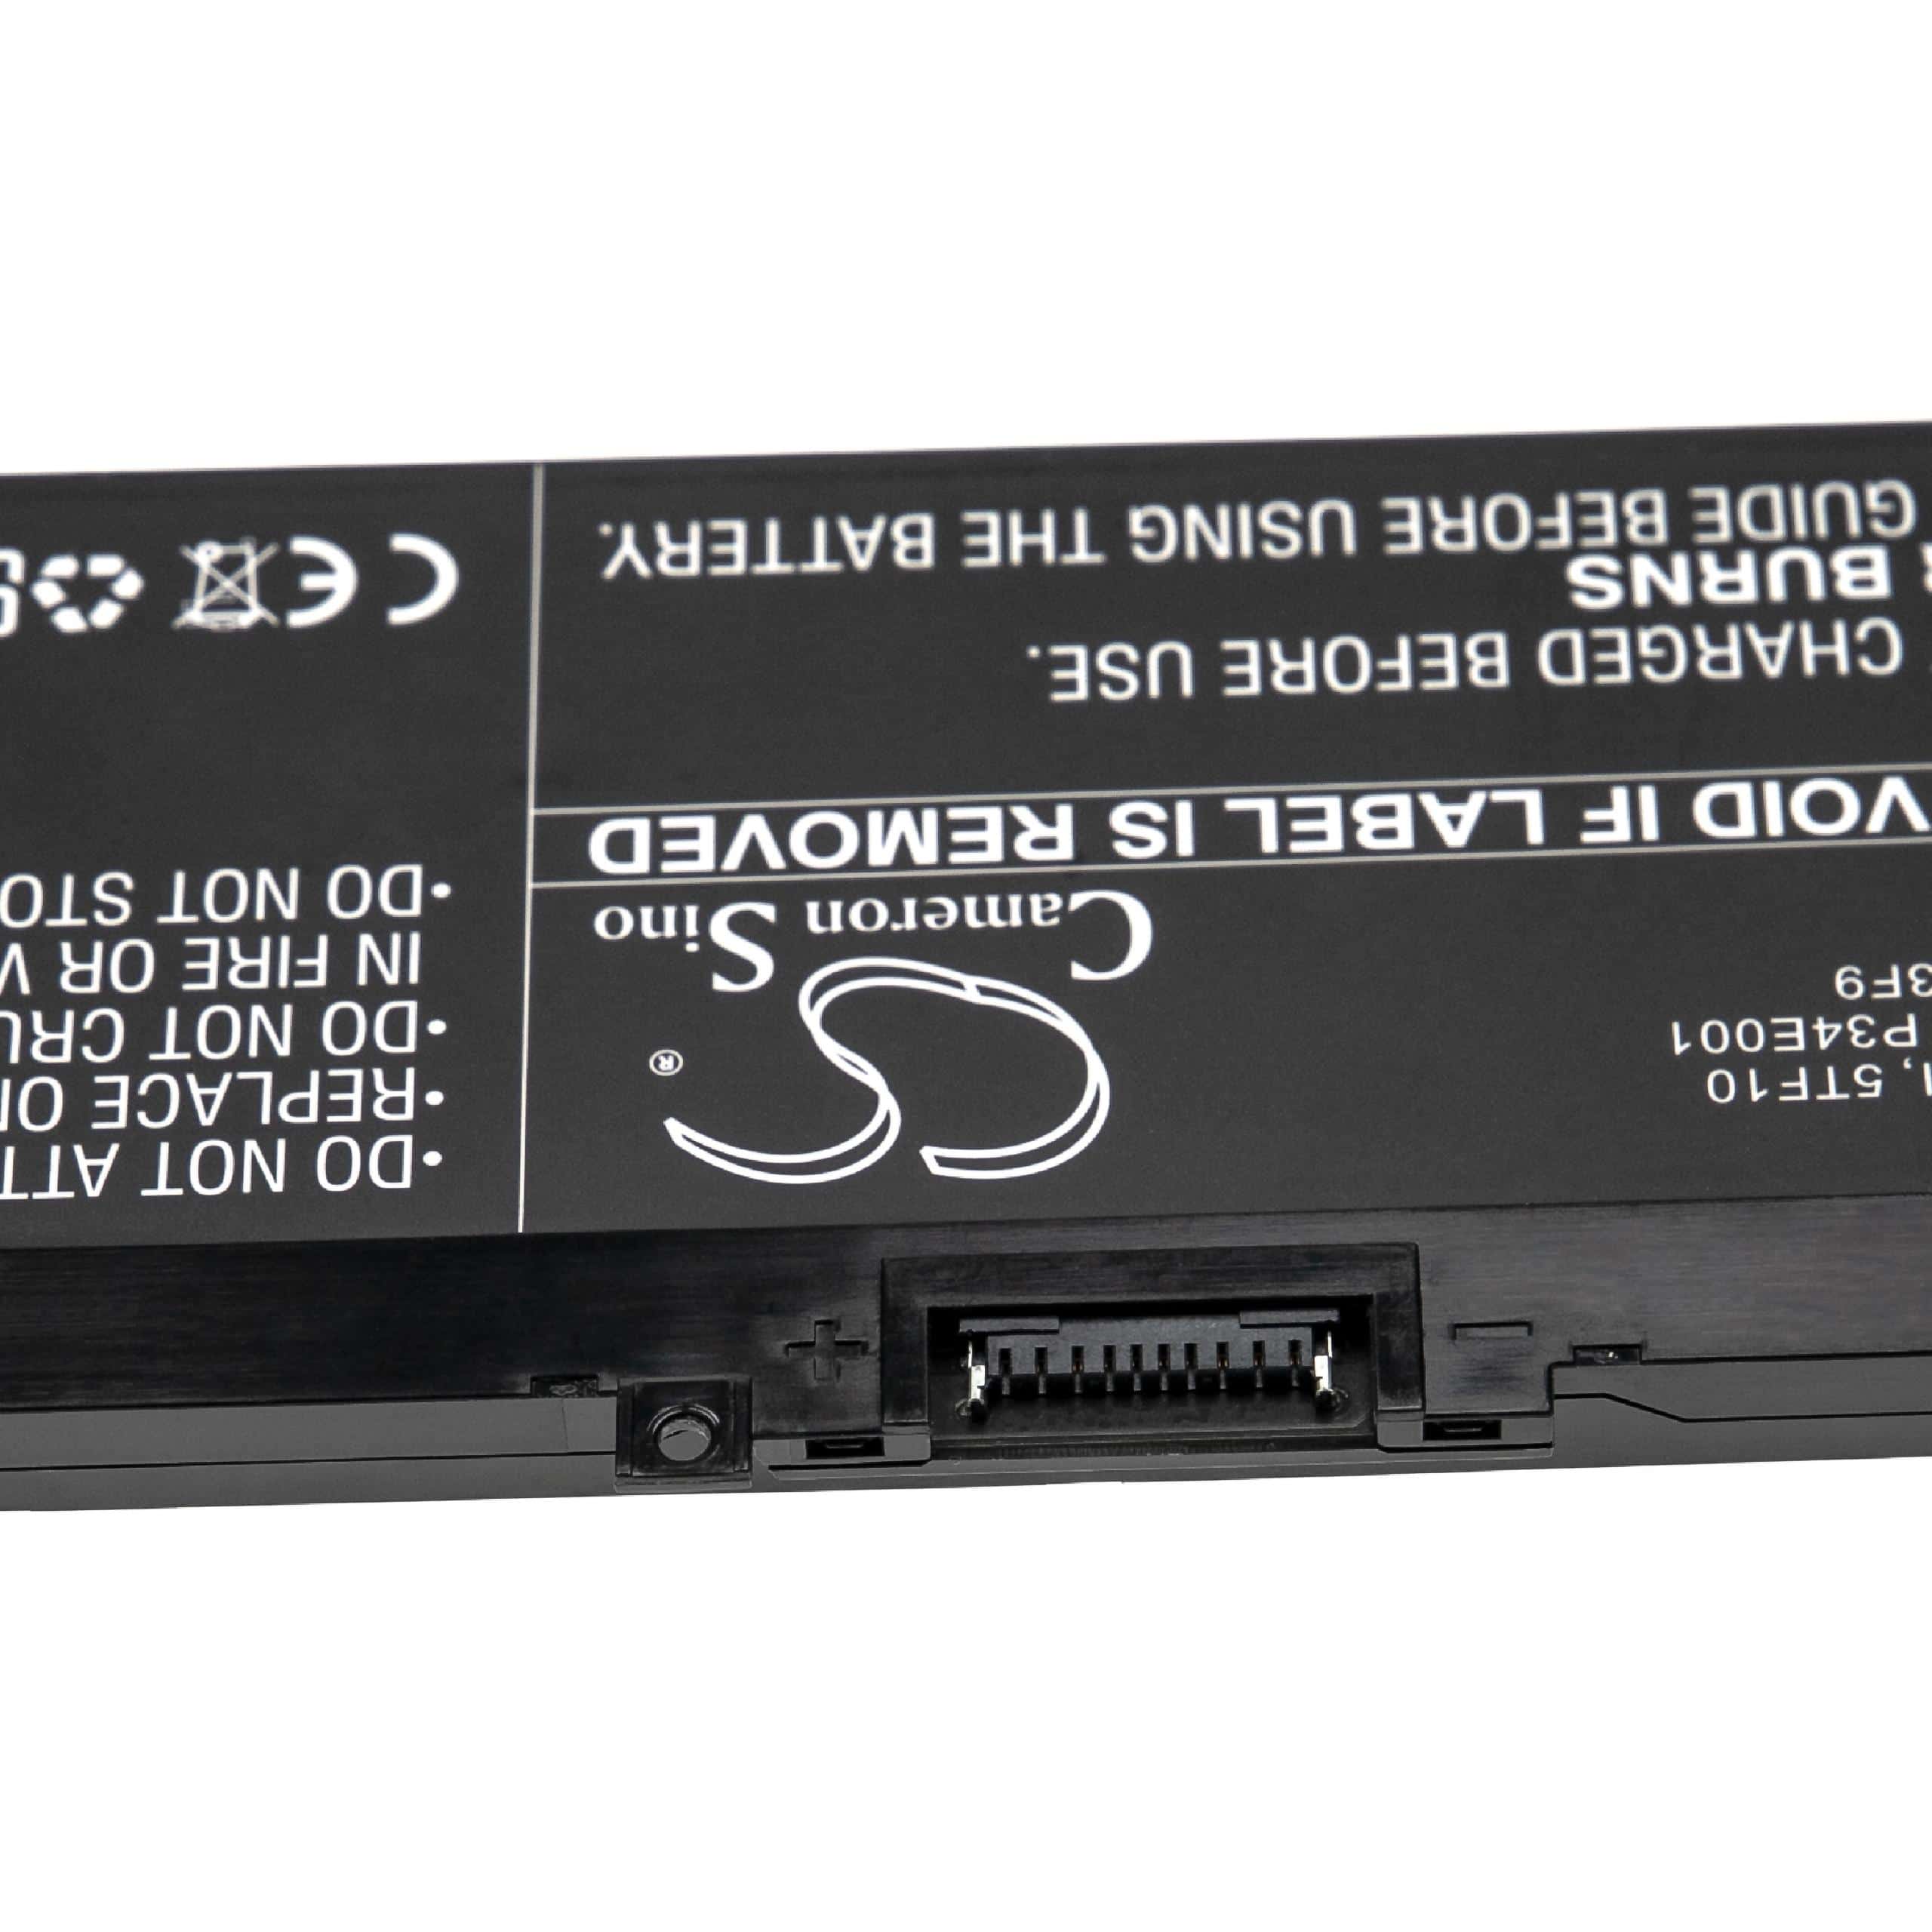 Notebook Battery for Dell Precision 7330, 7530, 7540, 7730, 0RY3F9, 0VRX0J, 0WMRC77I, 451-BCGI, 5TF10, 7M0T6, 